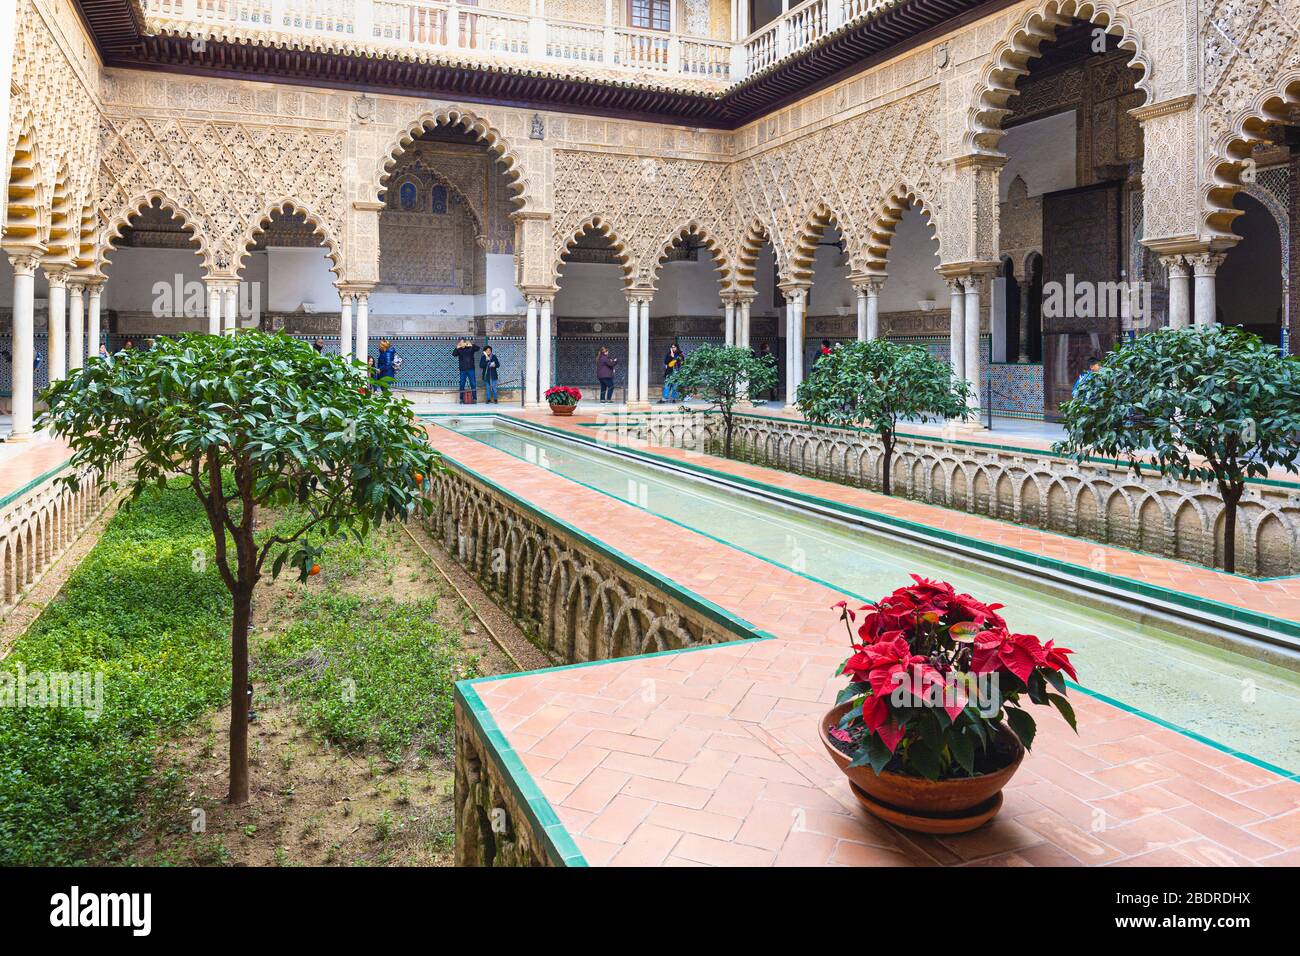 Patio de las Doncellas. The Maiden’s Courtyard.  Royal Alcazars, Seville, Seville Province, Andalusia, Spain.  The monumental complex formed by the Ca Stock Photo